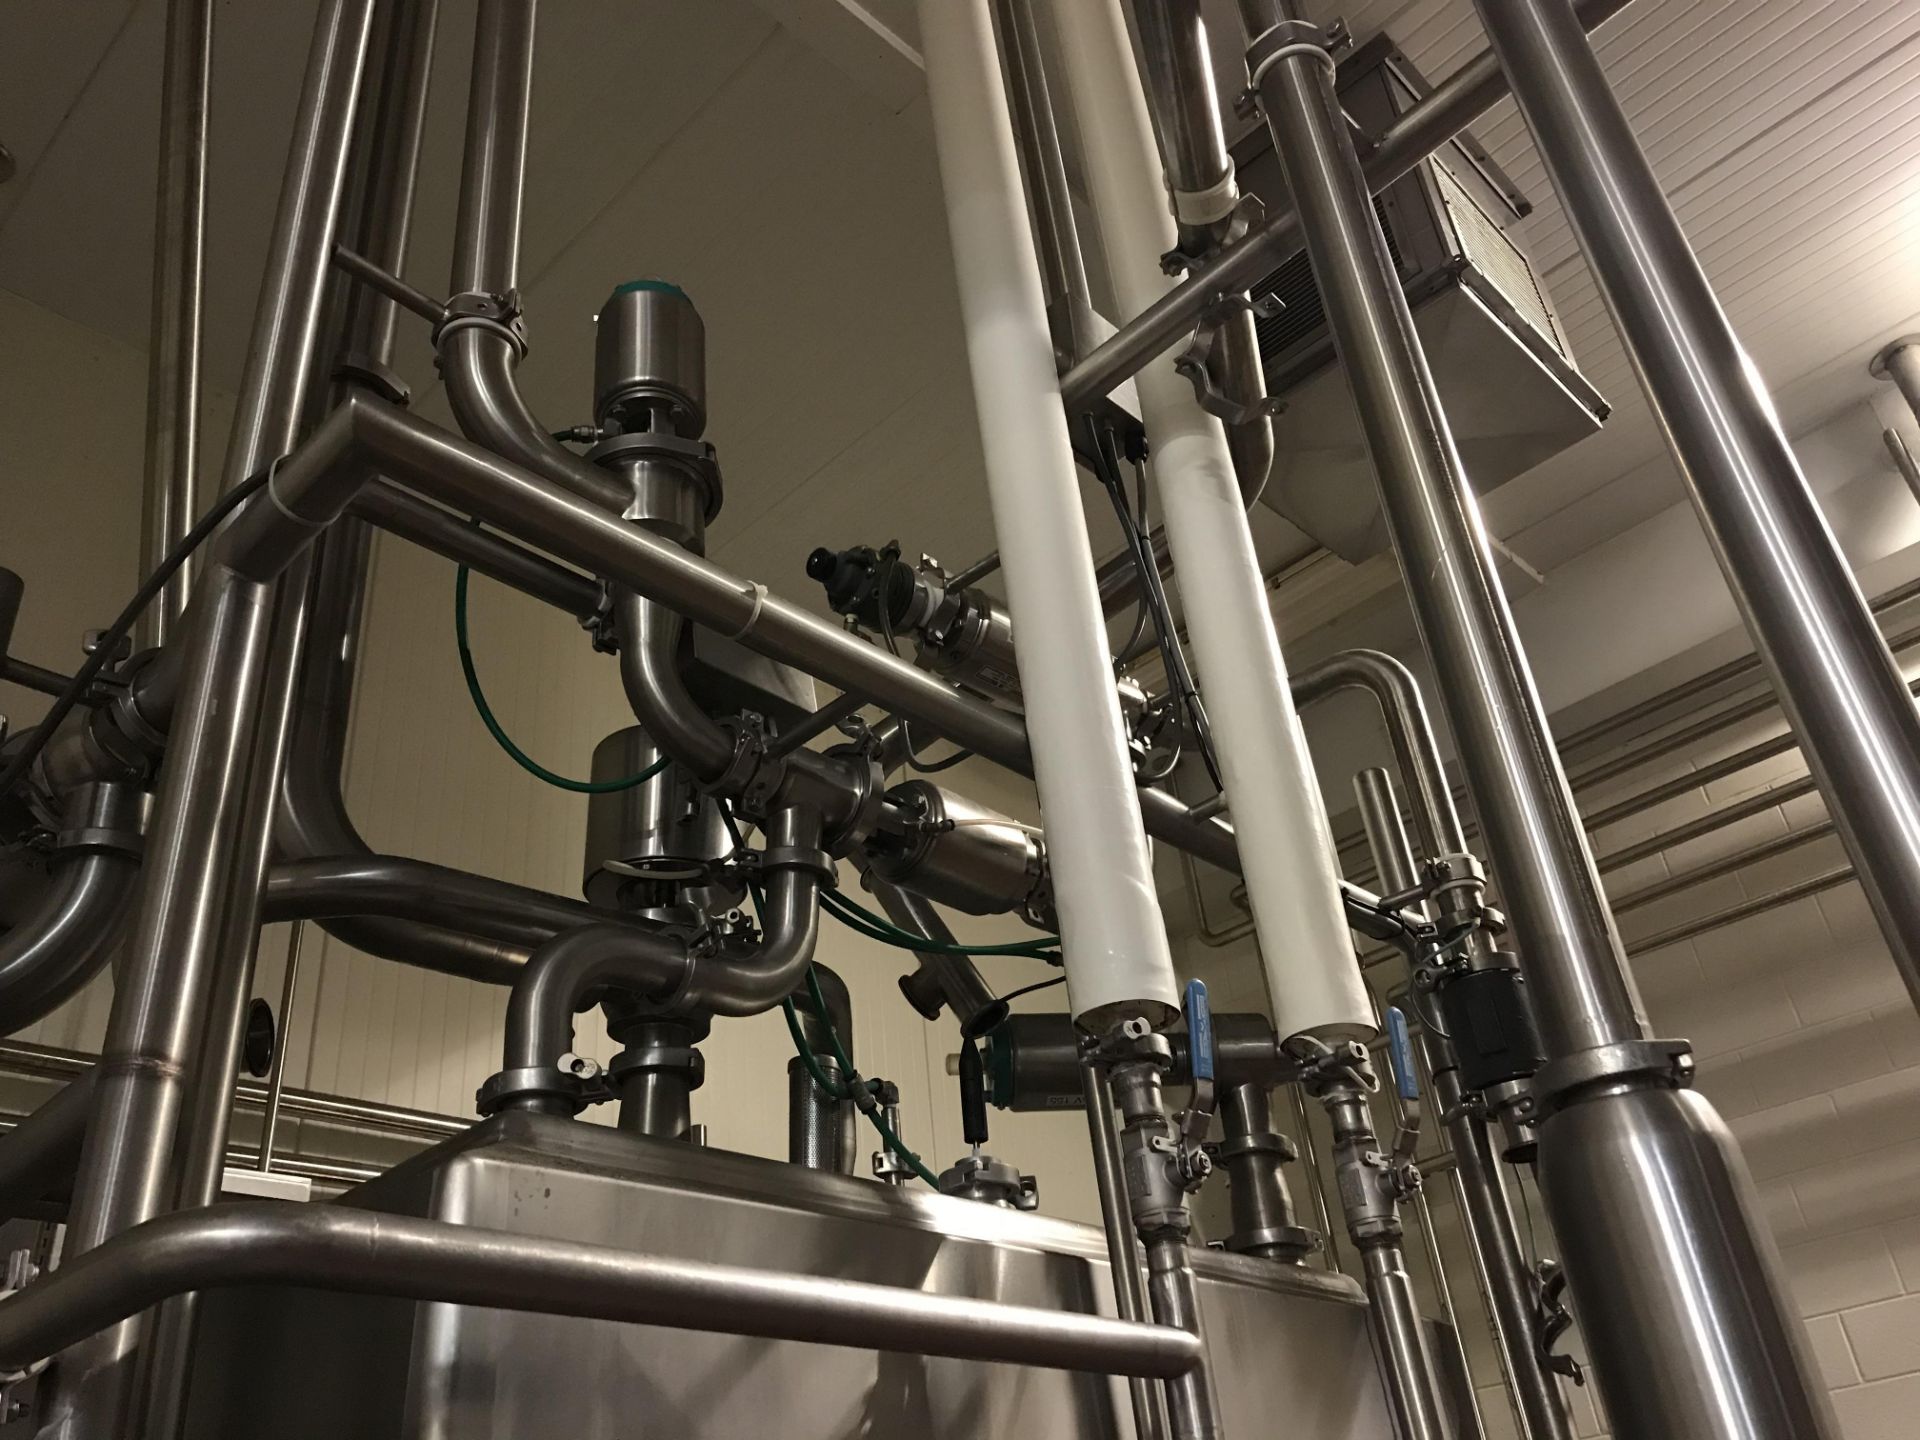 Bulk Bid for Chocolate Milk Blending System, Lots 42 - 50 - The greater of the bul | Rig Fee: $2950 - Image 3 of 4